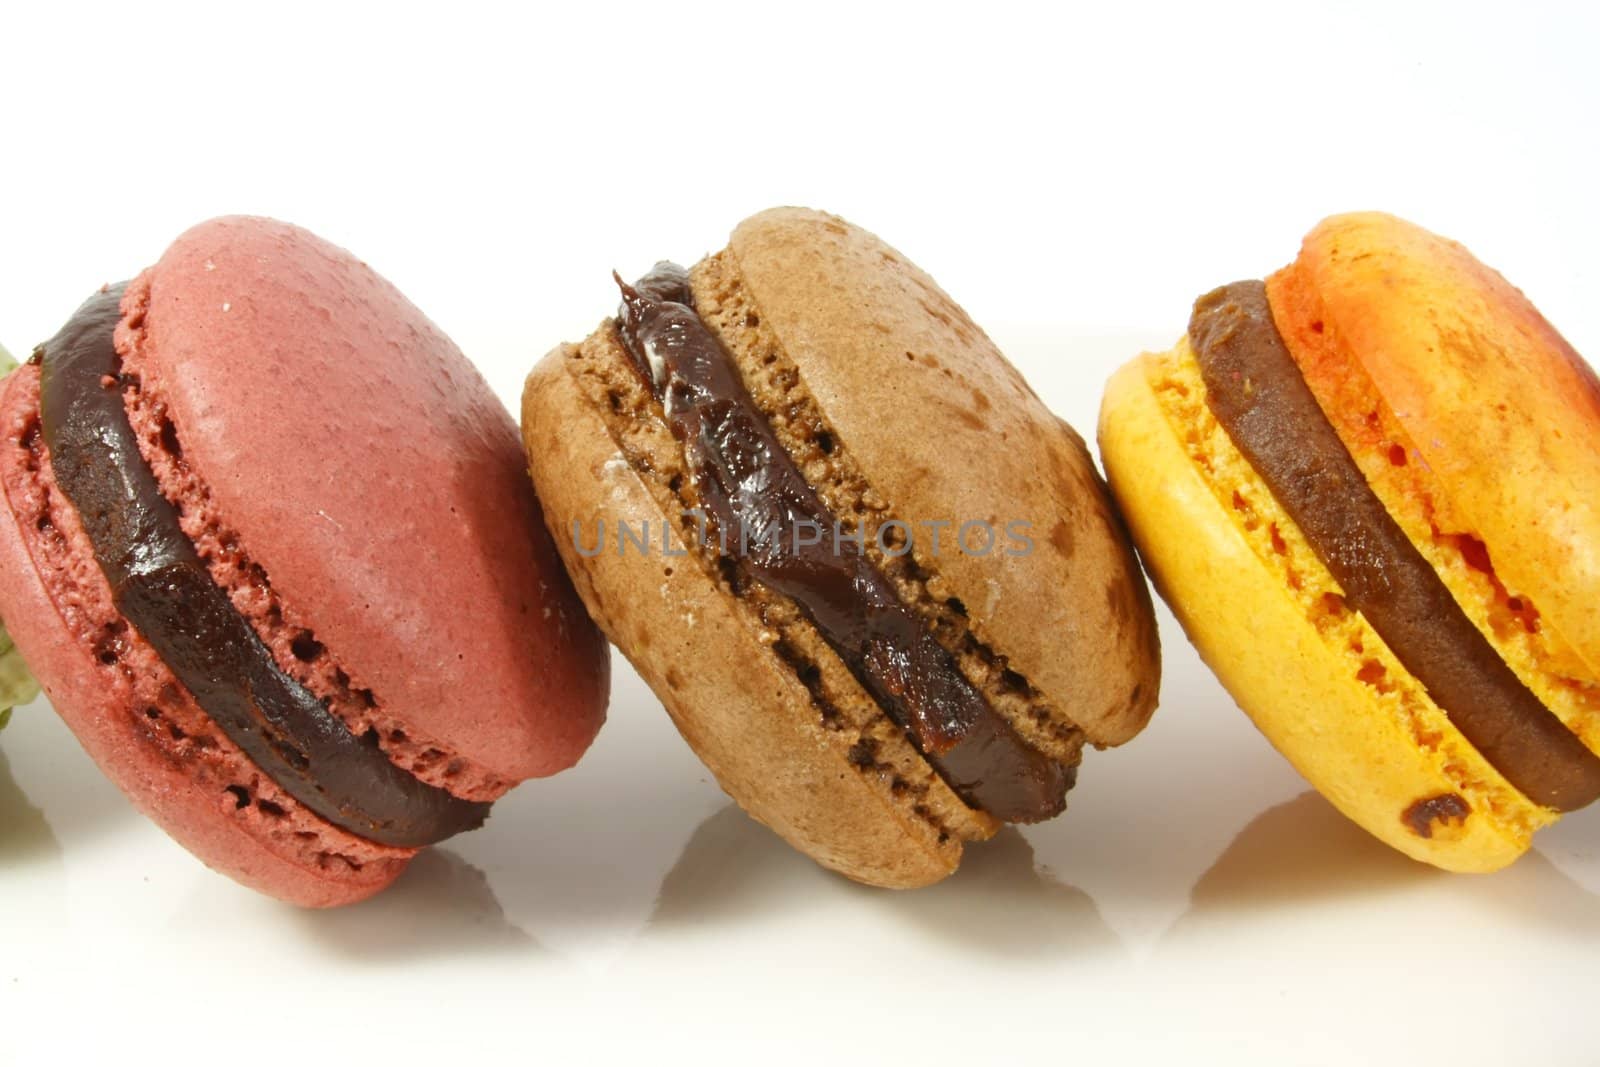 Macaroons Group on a Reflective White Background